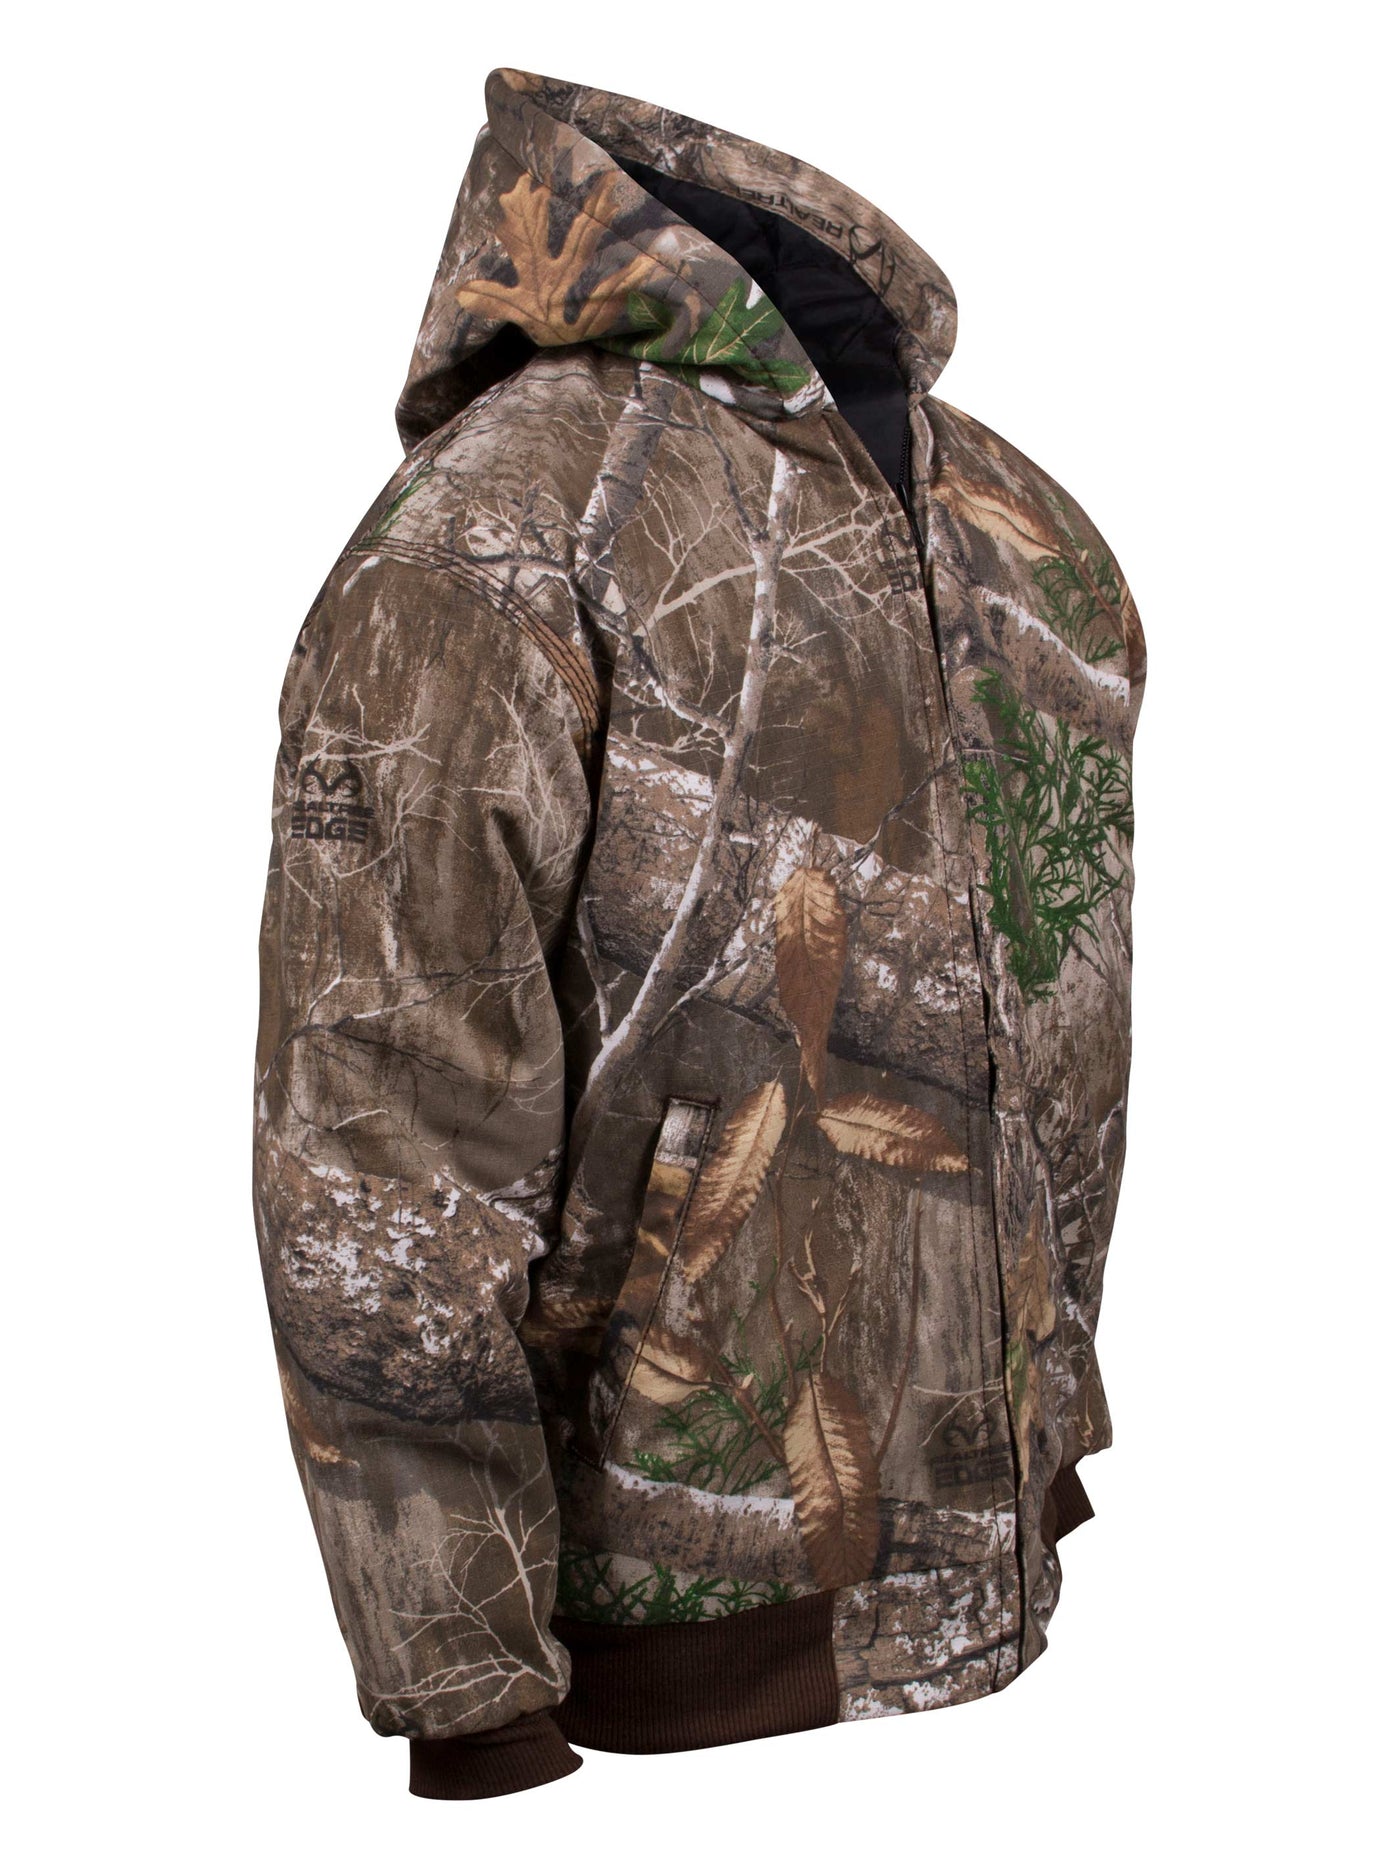 Kids Classic Insulated Jacket in Realtree Edge | Corbotras lochi